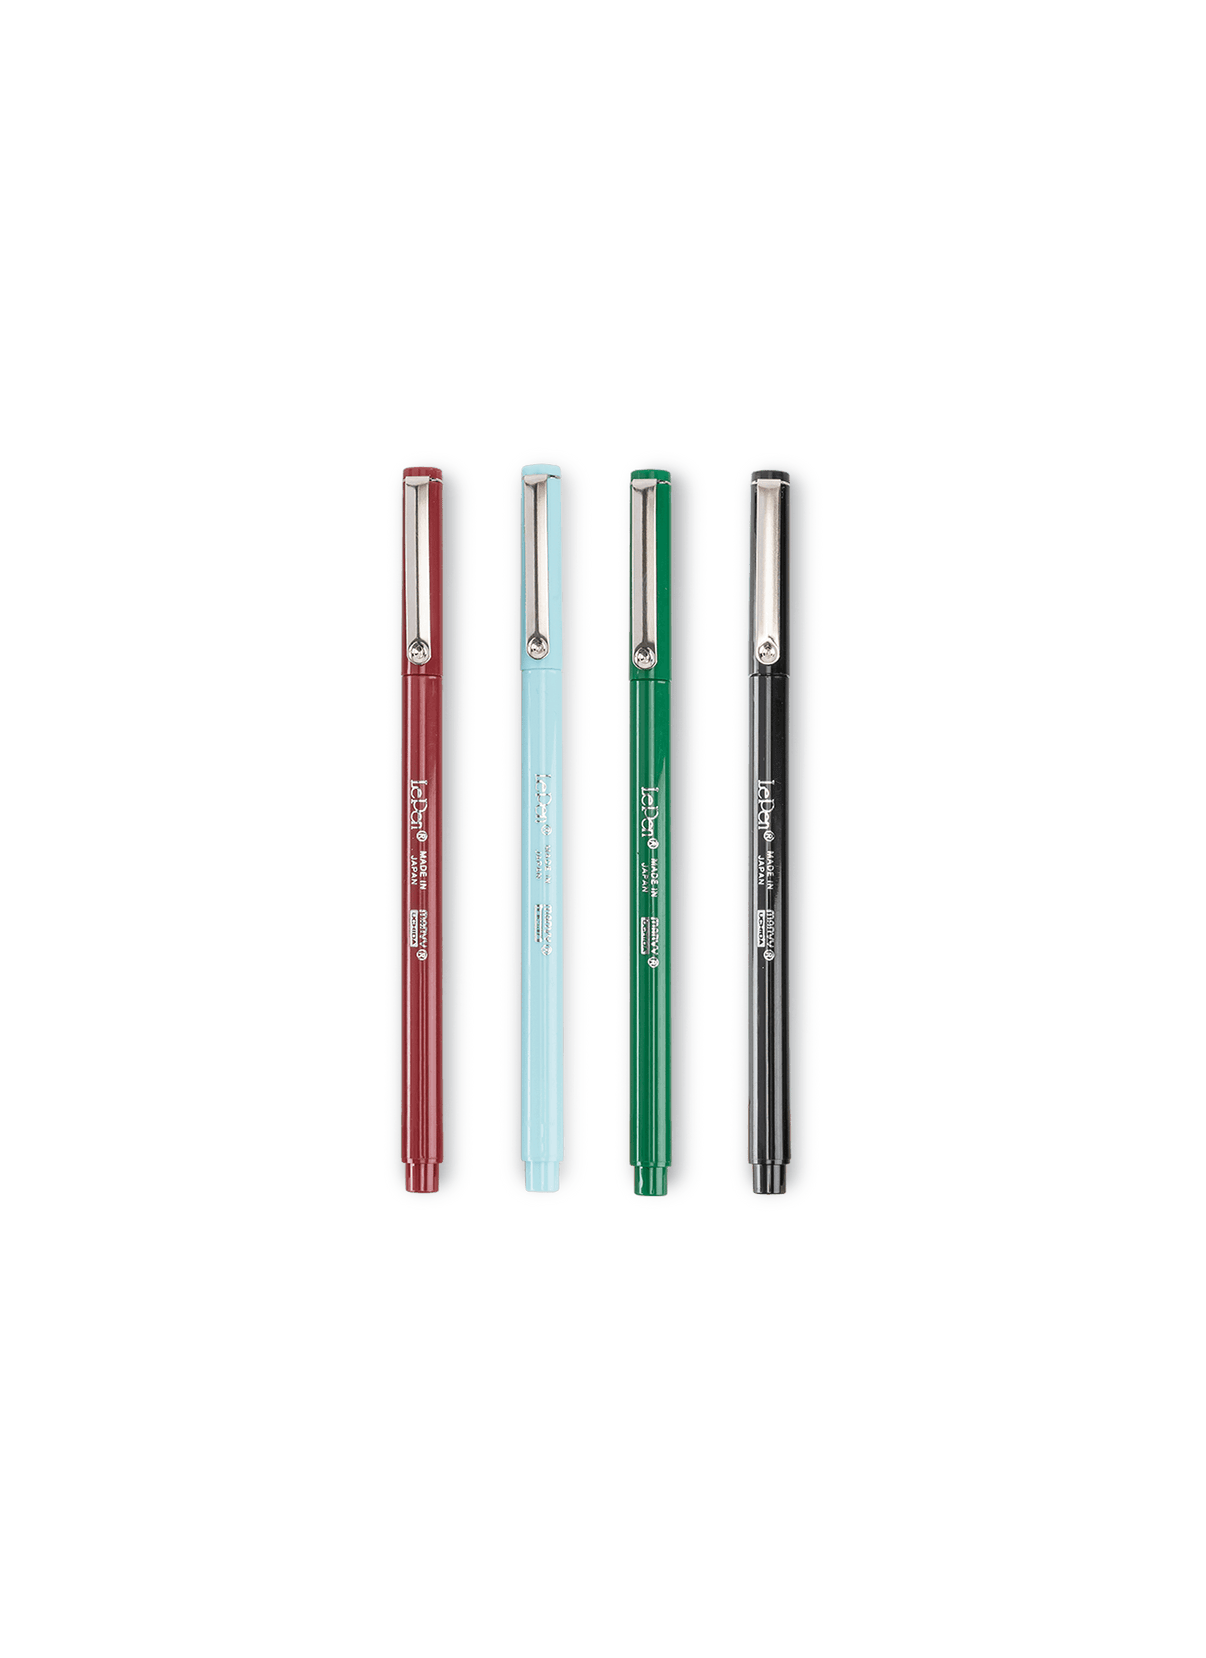 Le Pen Essentials Set in Black, Burgundy, Pale Blue and Green